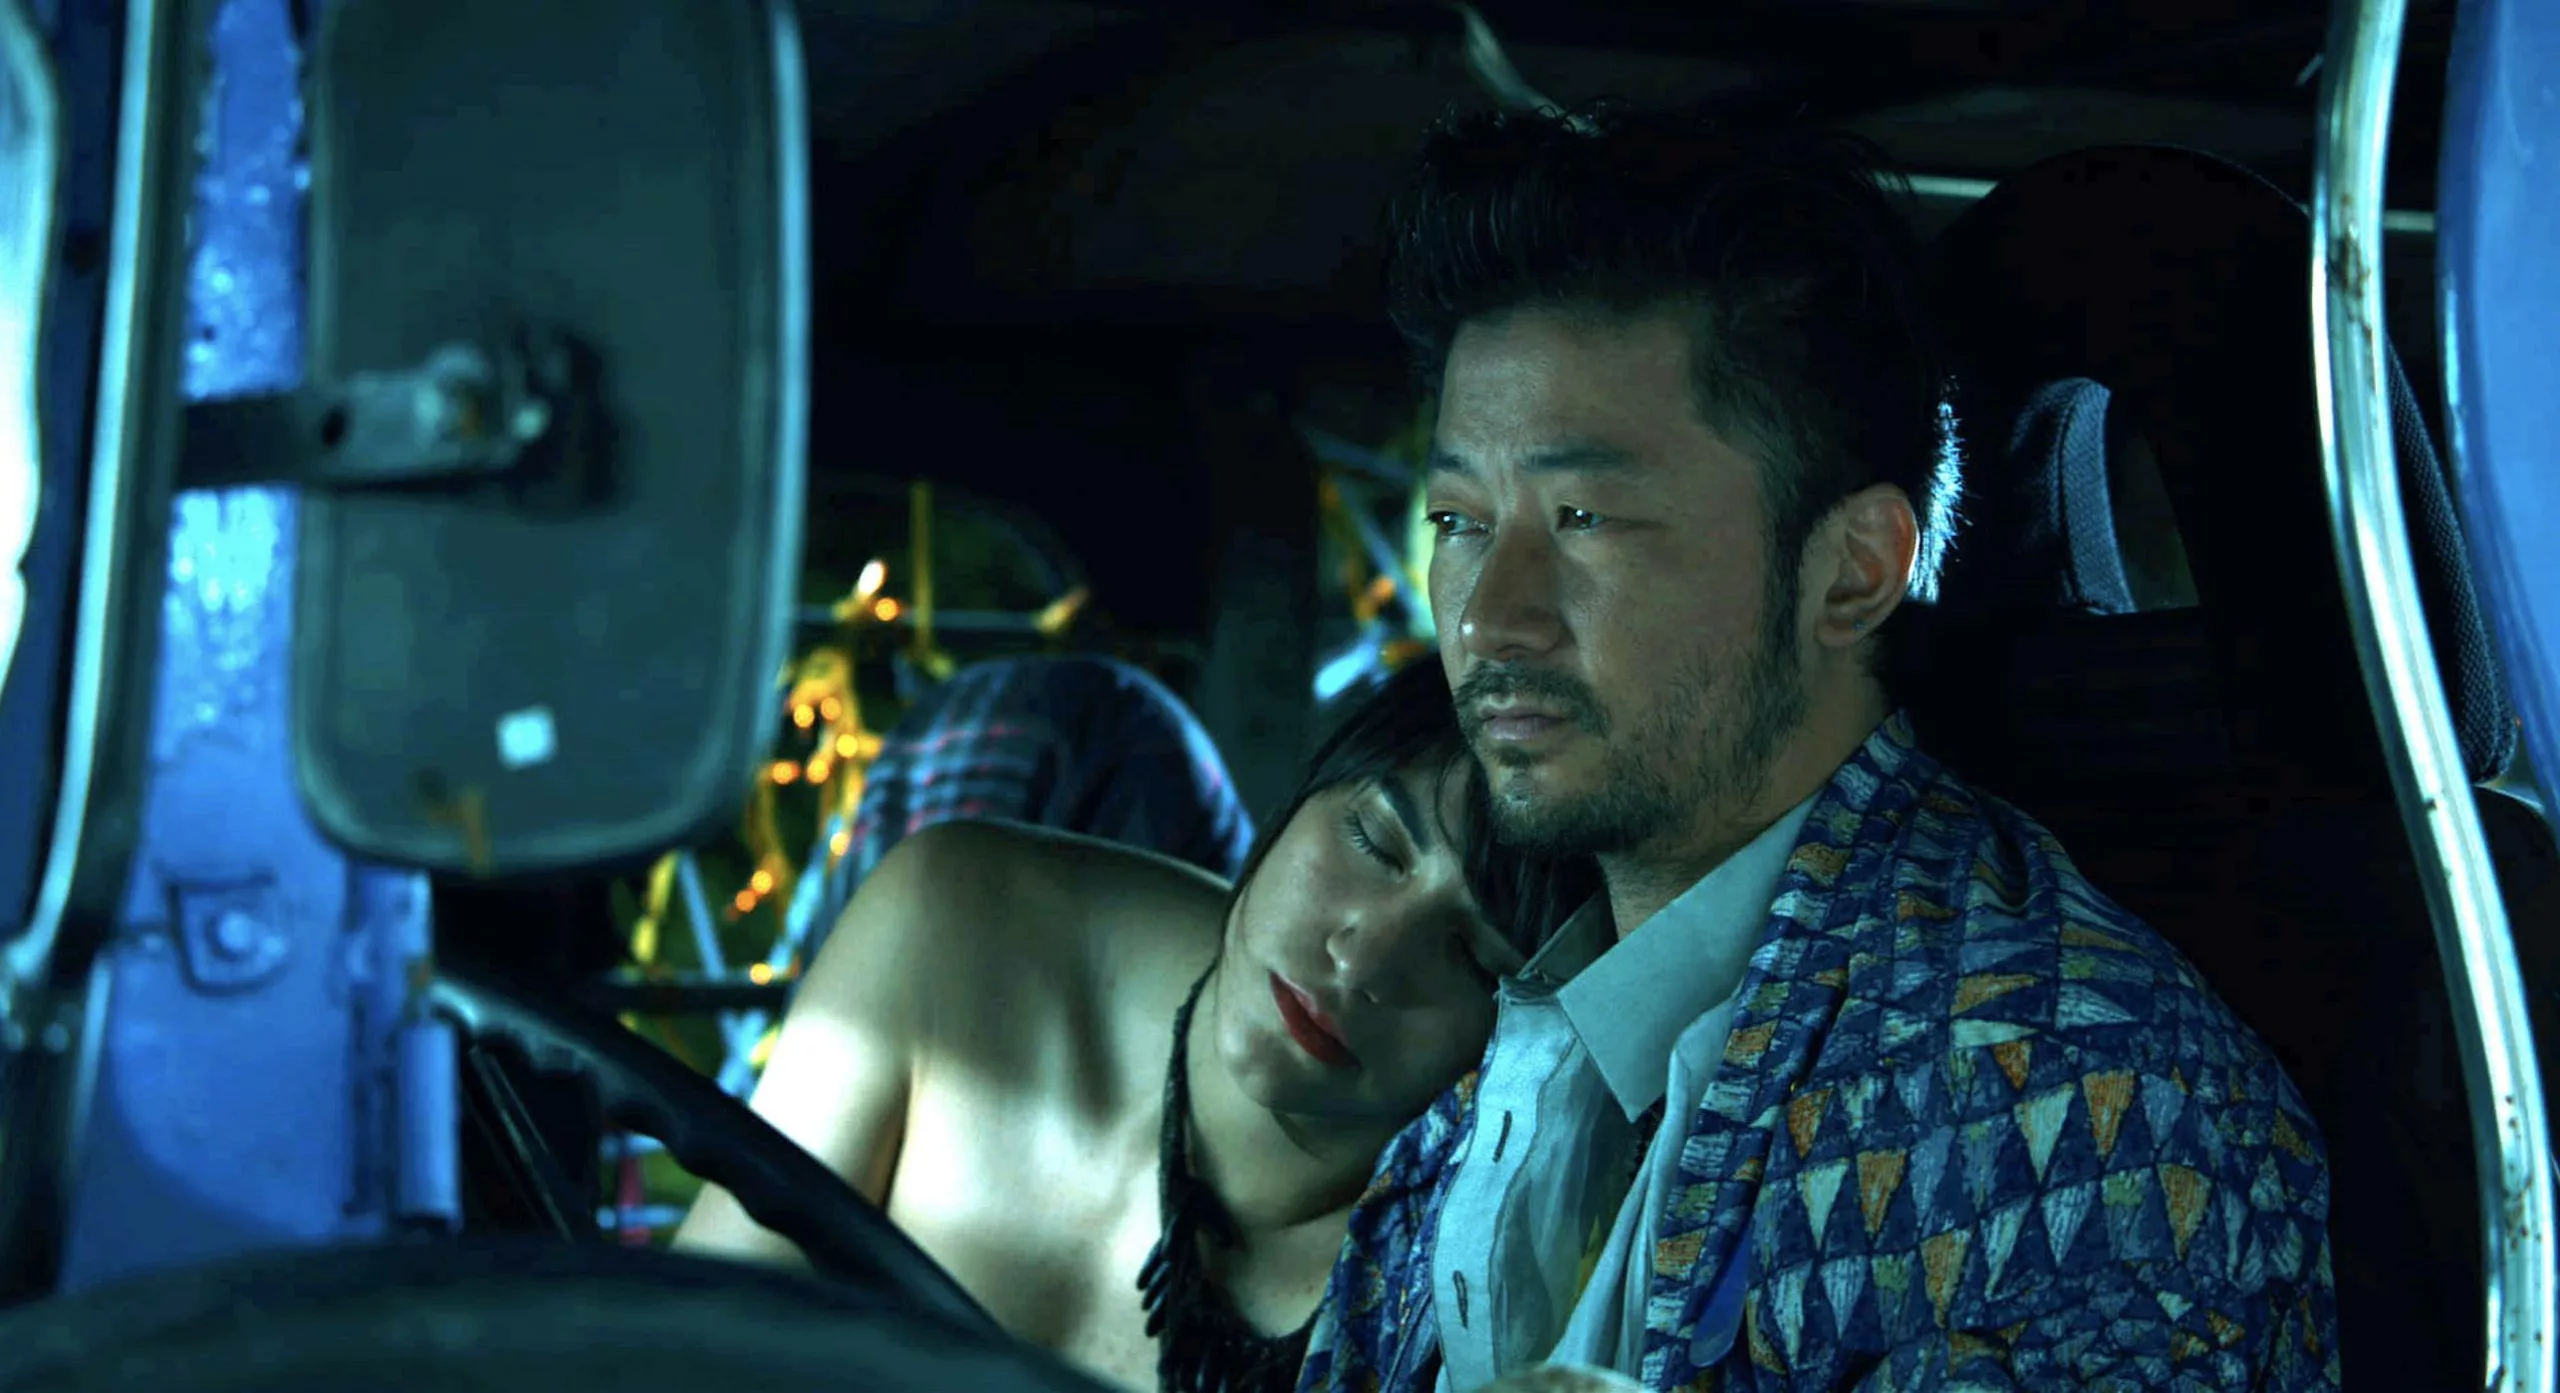 A man and woman sitting in the cab of a truck or bus.